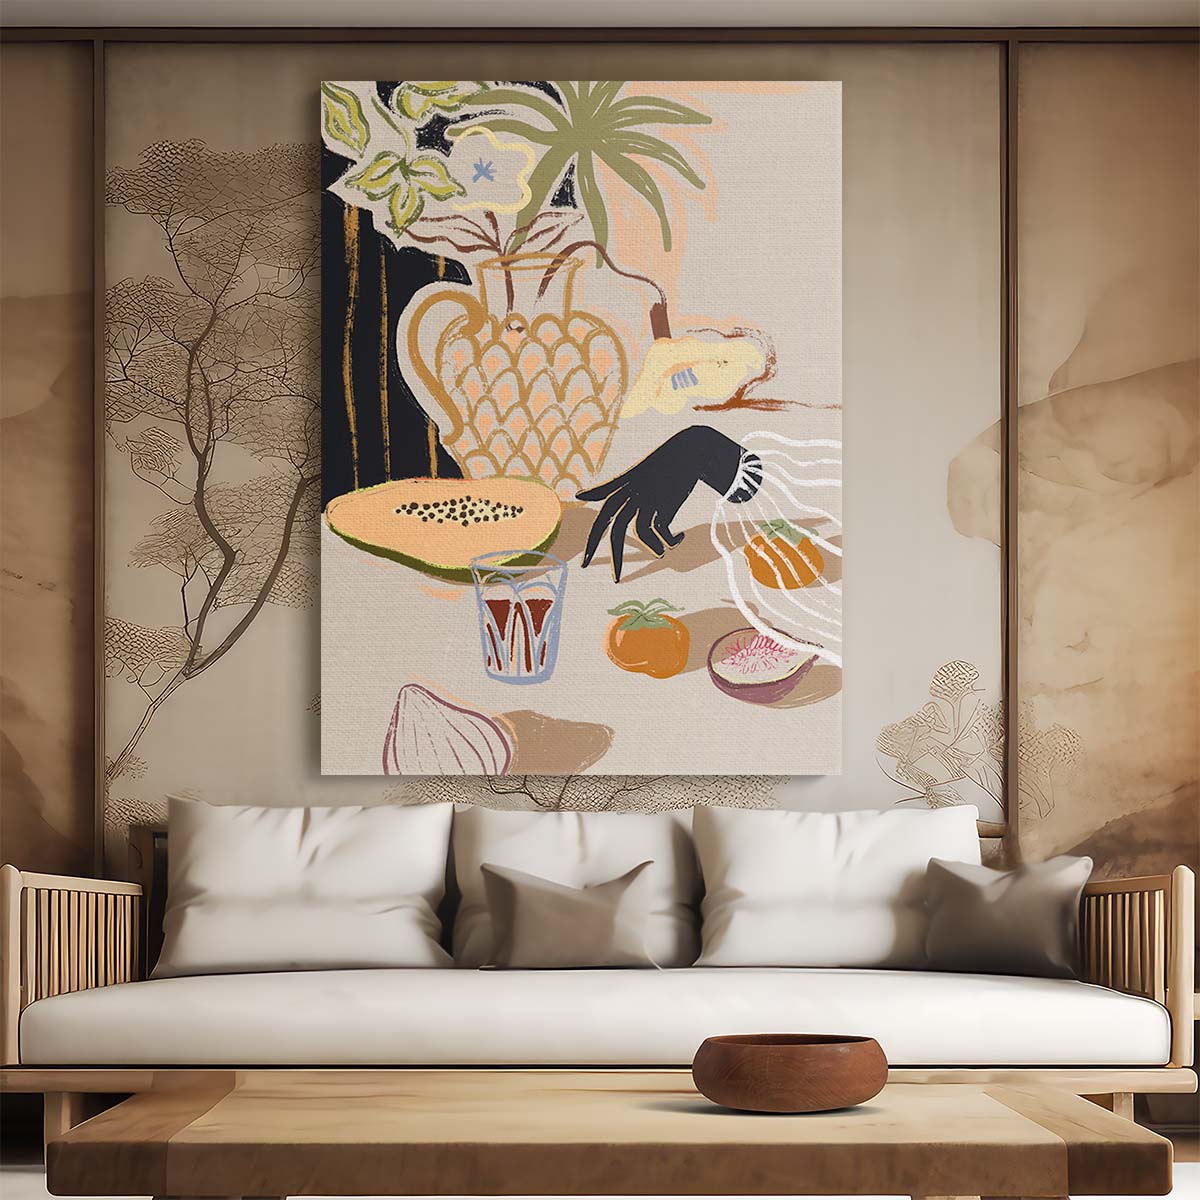 Colorful Botanical & Fruit Illustration Figurative Still-Life Art by Luxuriance Designs, made in USA